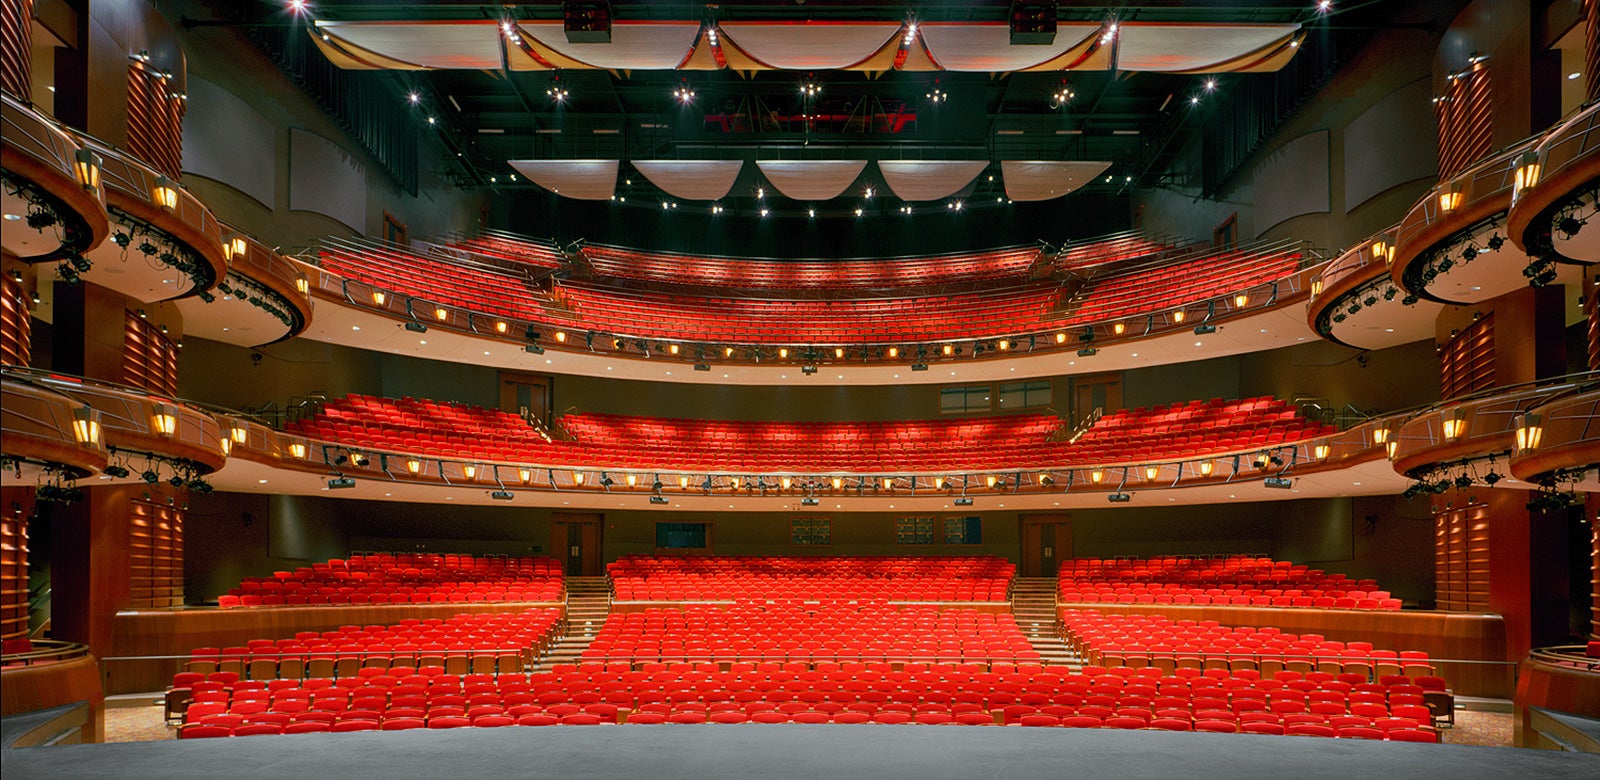 Seating Chart Cobb Energy Performing Arts